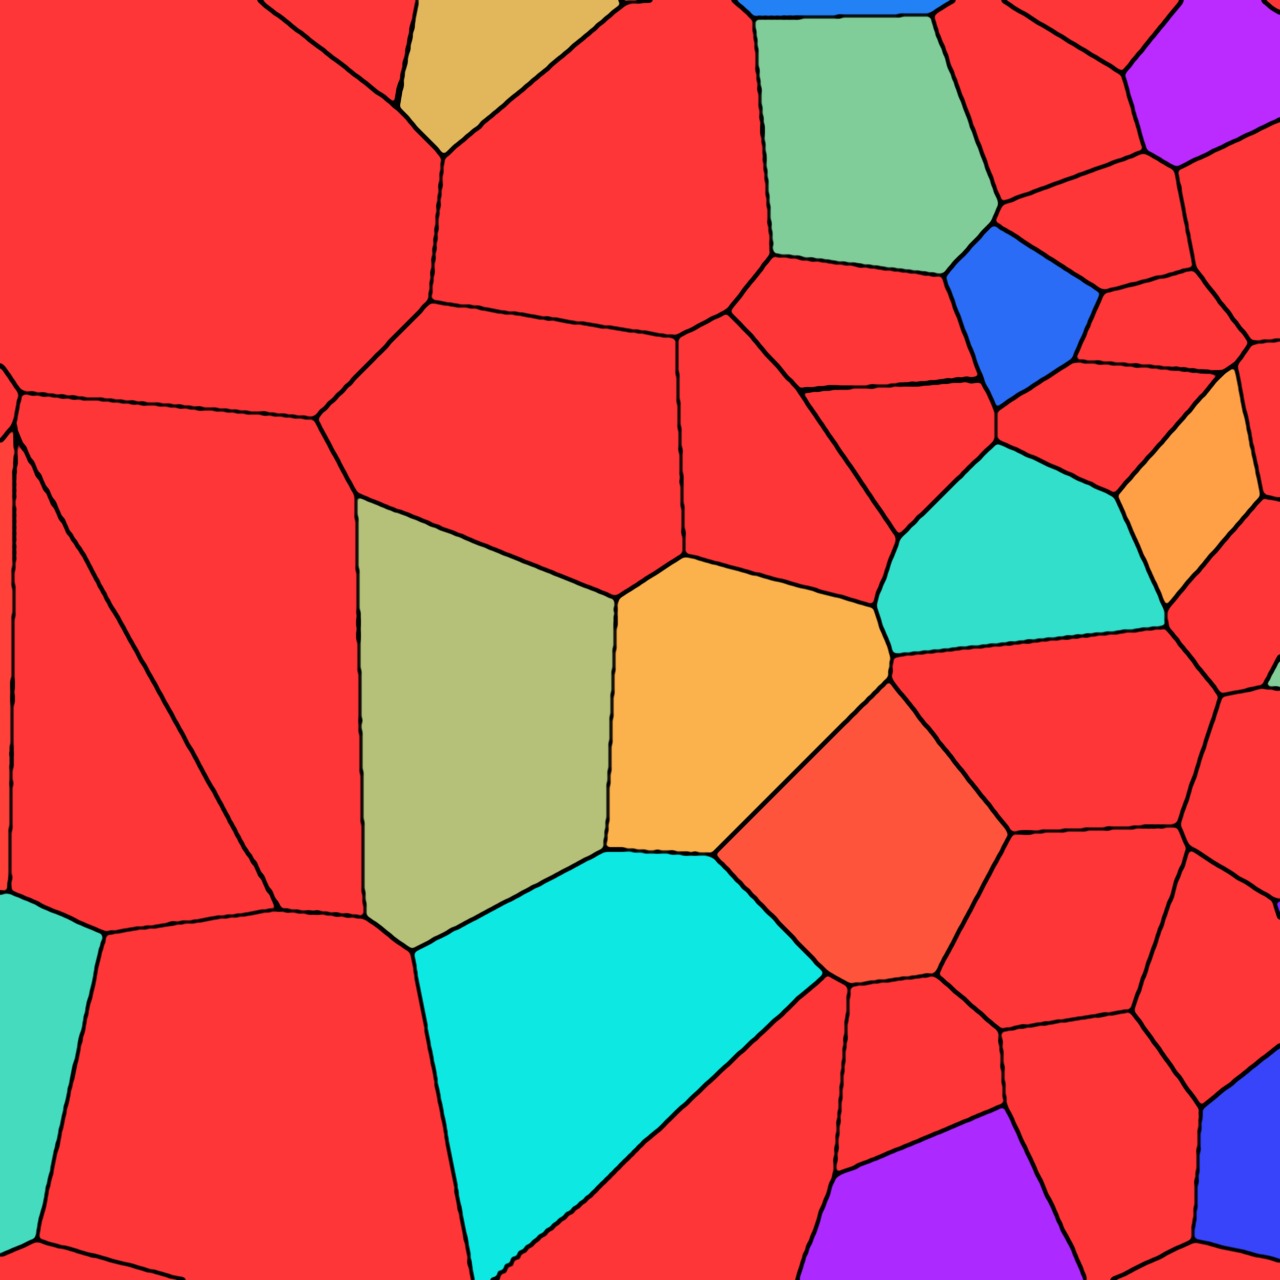 Voronoi pattern produced by Code 02